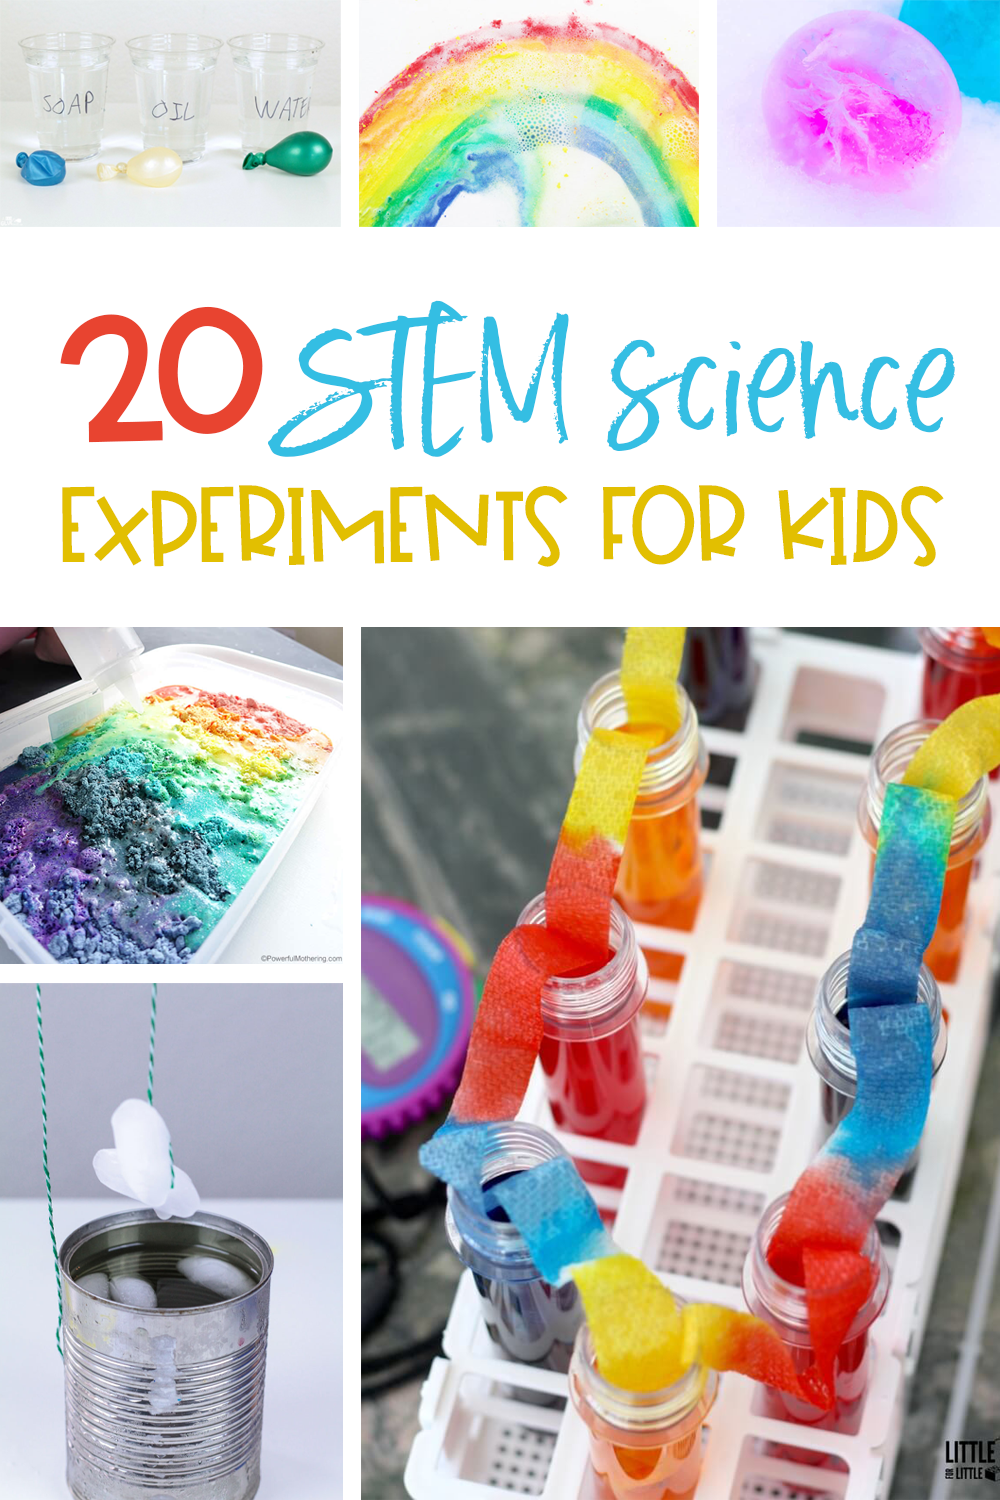 science experiments capstone project ideas for stem students